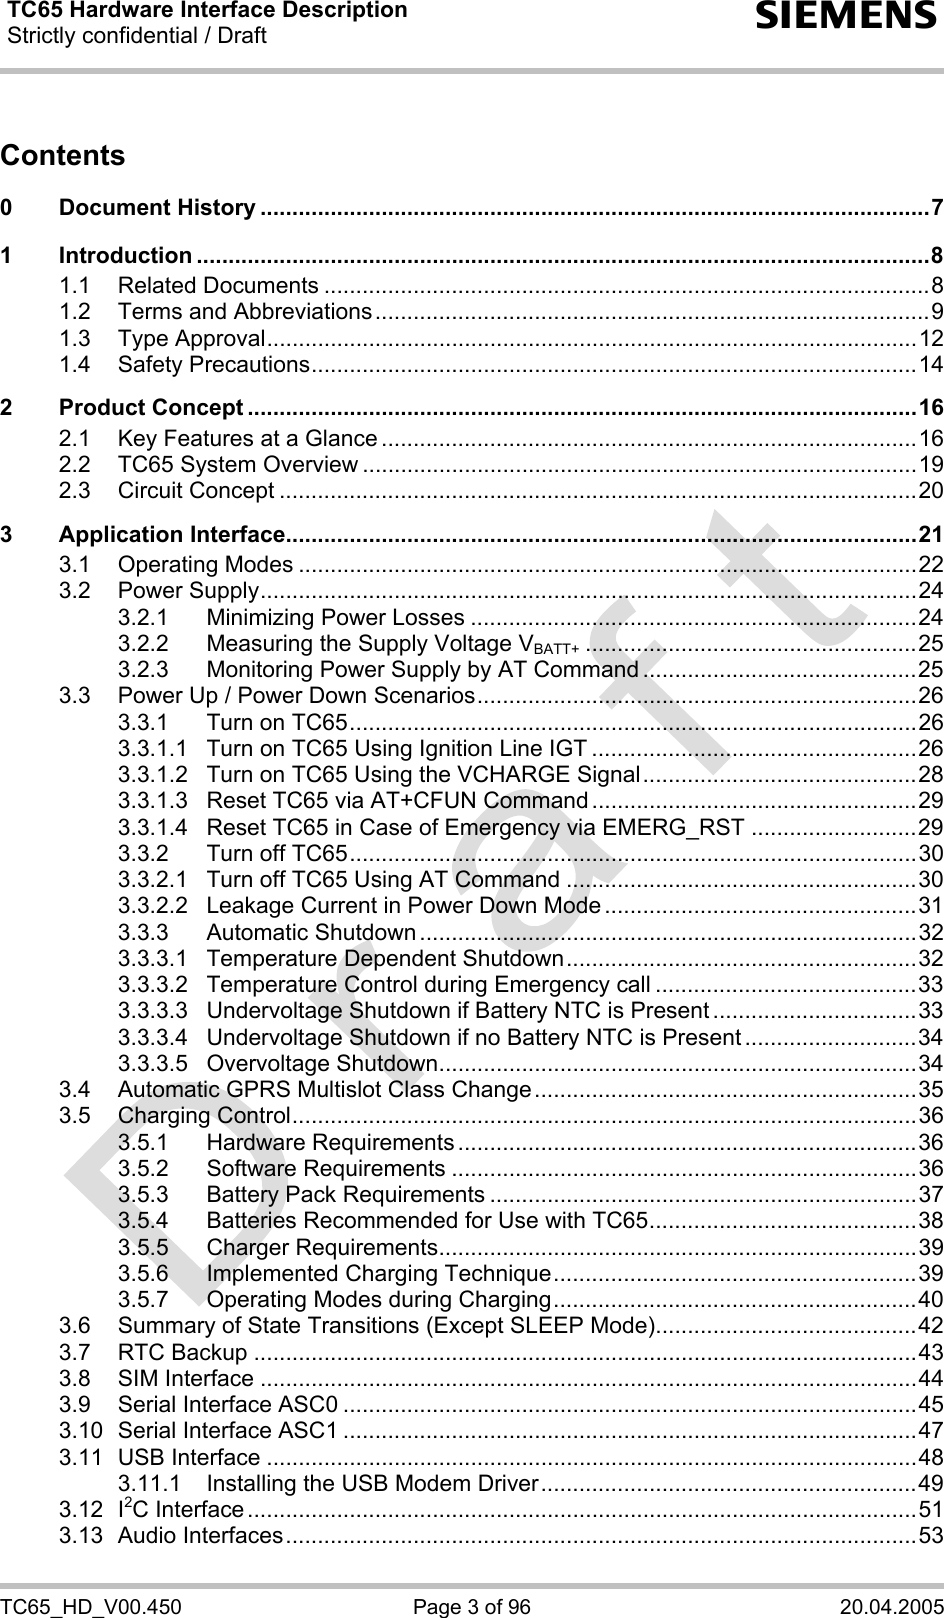 TC65 Hardware Interface Description Strictly confidential / Draft  s TC65_HD_V00.450  Page 3 of 96  20.04.2005 Contents  0 Document History .........................................................................................................7 1 Introduction ...................................................................................................................8 1.1 Related Documents ...............................................................................................8 1.2 Terms and Abbreviations.......................................................................................9 1.3 Type Approval......................................................................................................12 1.4 Safety Precautions...............................................................................................14 2 Product Concept .........................................................................................................16 2.1 Key Features at a Glance ....................................................................................16 2.2 TC65 System Overview .......................................................................................19 2.3 Circuit Concept ....................................................................................................20 3 Application Interface...................................................................................................21 3.1 Operating Modes .................................................................................................22 3.2 Power Supply.......................................................................................................24 3.2.1 Minimizing Power Losses ......................................................................24 3.2.2 Measuring the Supply Voltage VBATT+ ....................................................25 3.2.3 Monitoring Power Supply by AT Command ...........................................25 3.3 Power Up / Power Down Scenarios.....................................................................26 3.3.1 Turn on TC65.........................................................................................26 3.3.1.1 Turn on TC65 Using Ignition Line IGT ...................................................26 3.3.1.2 Turn on TC65 Using the VCHARGE Signal...........................................28 3.3.1.3 Reset TC65 via AT+CFUN Command ...................................................29 3.3.1.4 Reset TC65 in Case of Emergency via EMERG_RST ..........................29 3.3.2 Turn off TC65.........................................................................................30 3.3.2.1 Turn off TC65 Using AT Command .......................................................30 3.3.2.2 Leakage Current in Power Down Mode .................................................31 3.3.3 Automatic Shutdown ..............................................................................32 3.3.3.1 Temperature Dependent Shutdown.......................................................32 3.3.3.2 Temperature Control during Emergency call .........................................33 3.3.3.3 Undervoltage Shutdown if Battery NTC is Present ................................33 3.3.3.4 Undervoltage Shutdown if no Battery NTC is Present ...........................34 3.3.3.5 Overvoltage Shutdown...........................................................................34 3.4 Automatic GPRS Multislot Class Change............................................................35 3.5 Charging Control..................................................................................................36 3.5.1 Hardware Requirements ........................................................................36 3.5.2 Software Requirements .........................................................................36 3.5.3 Battery Pack Requirements ...................................................................37 3.5.4 Batteries Recommended for Use with TC65..........................................38 3.5.5 Charger Requirements...........................................................................39 3.5.6 Implemented Charging Technique.........................................................39 3.5.7 Operating Modes during Charging.........................................................40 3.6 Summary of State Transitions (Except SLEEP Mode).........................................42 3.7 RTC Backup ........................................................................................................43 3.8 SIM Interface .......................................................................................................44 3.9 Serial Interface ASC0 ..........................................................................................45 3.10 Serial Interface ASC1 ..........................................................................................47 3.11 USB Interface ......................................................................................................48 3.11.1 Installing the USB Modem Driver...........................................................49 3.12 I2C Interface .........................................................................................................51 3.13 Audio Interfaces...................................................................................................53 